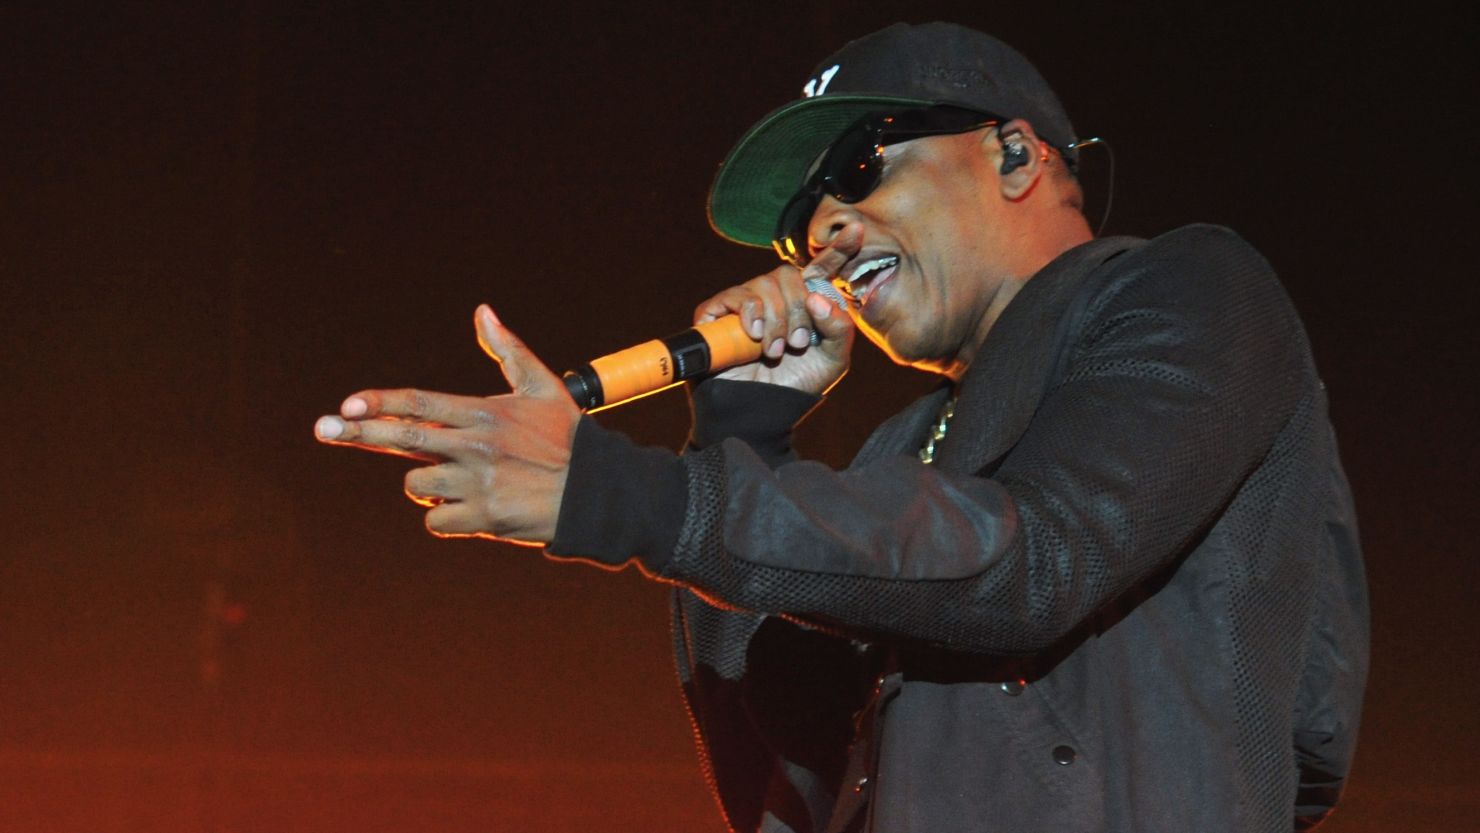 Jay-Z performs onstage at the 2014 Coachella Valley Music & Arts Festival at the Empire Polo Club Indio, California.